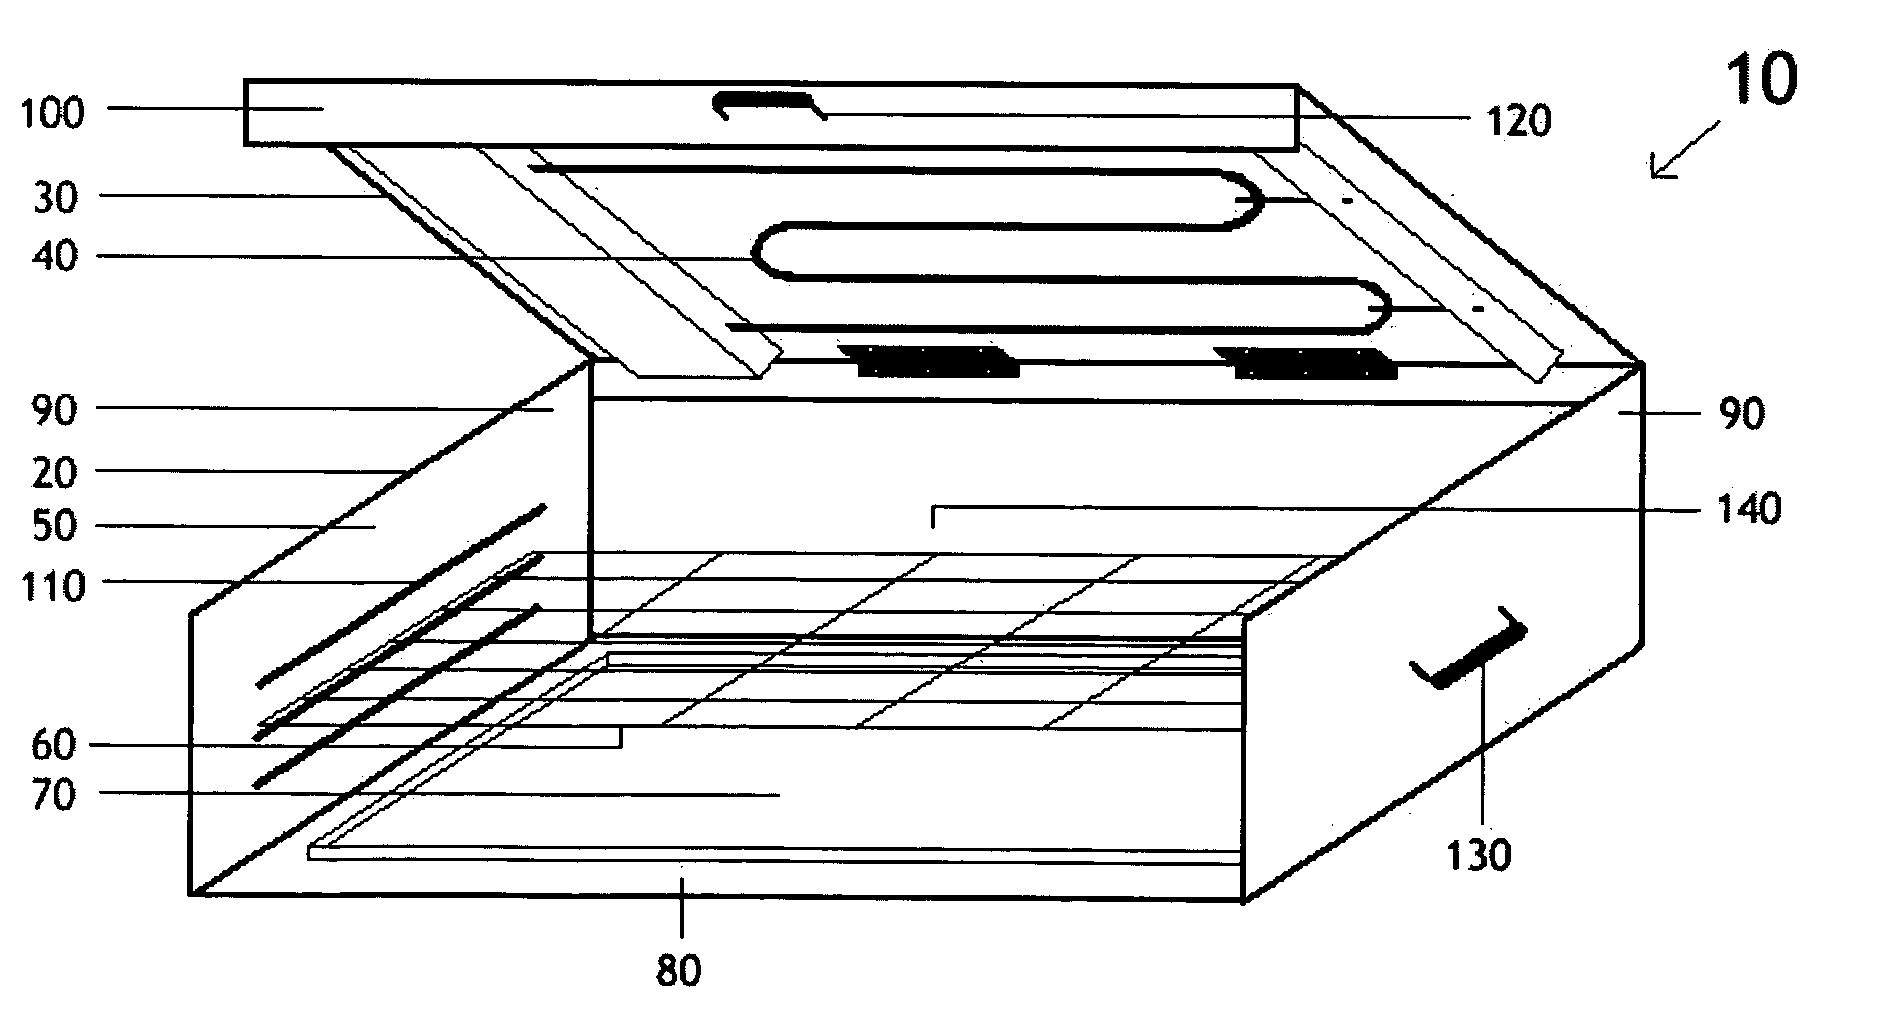 Cooking appliance with stationary grate and moveable heat source